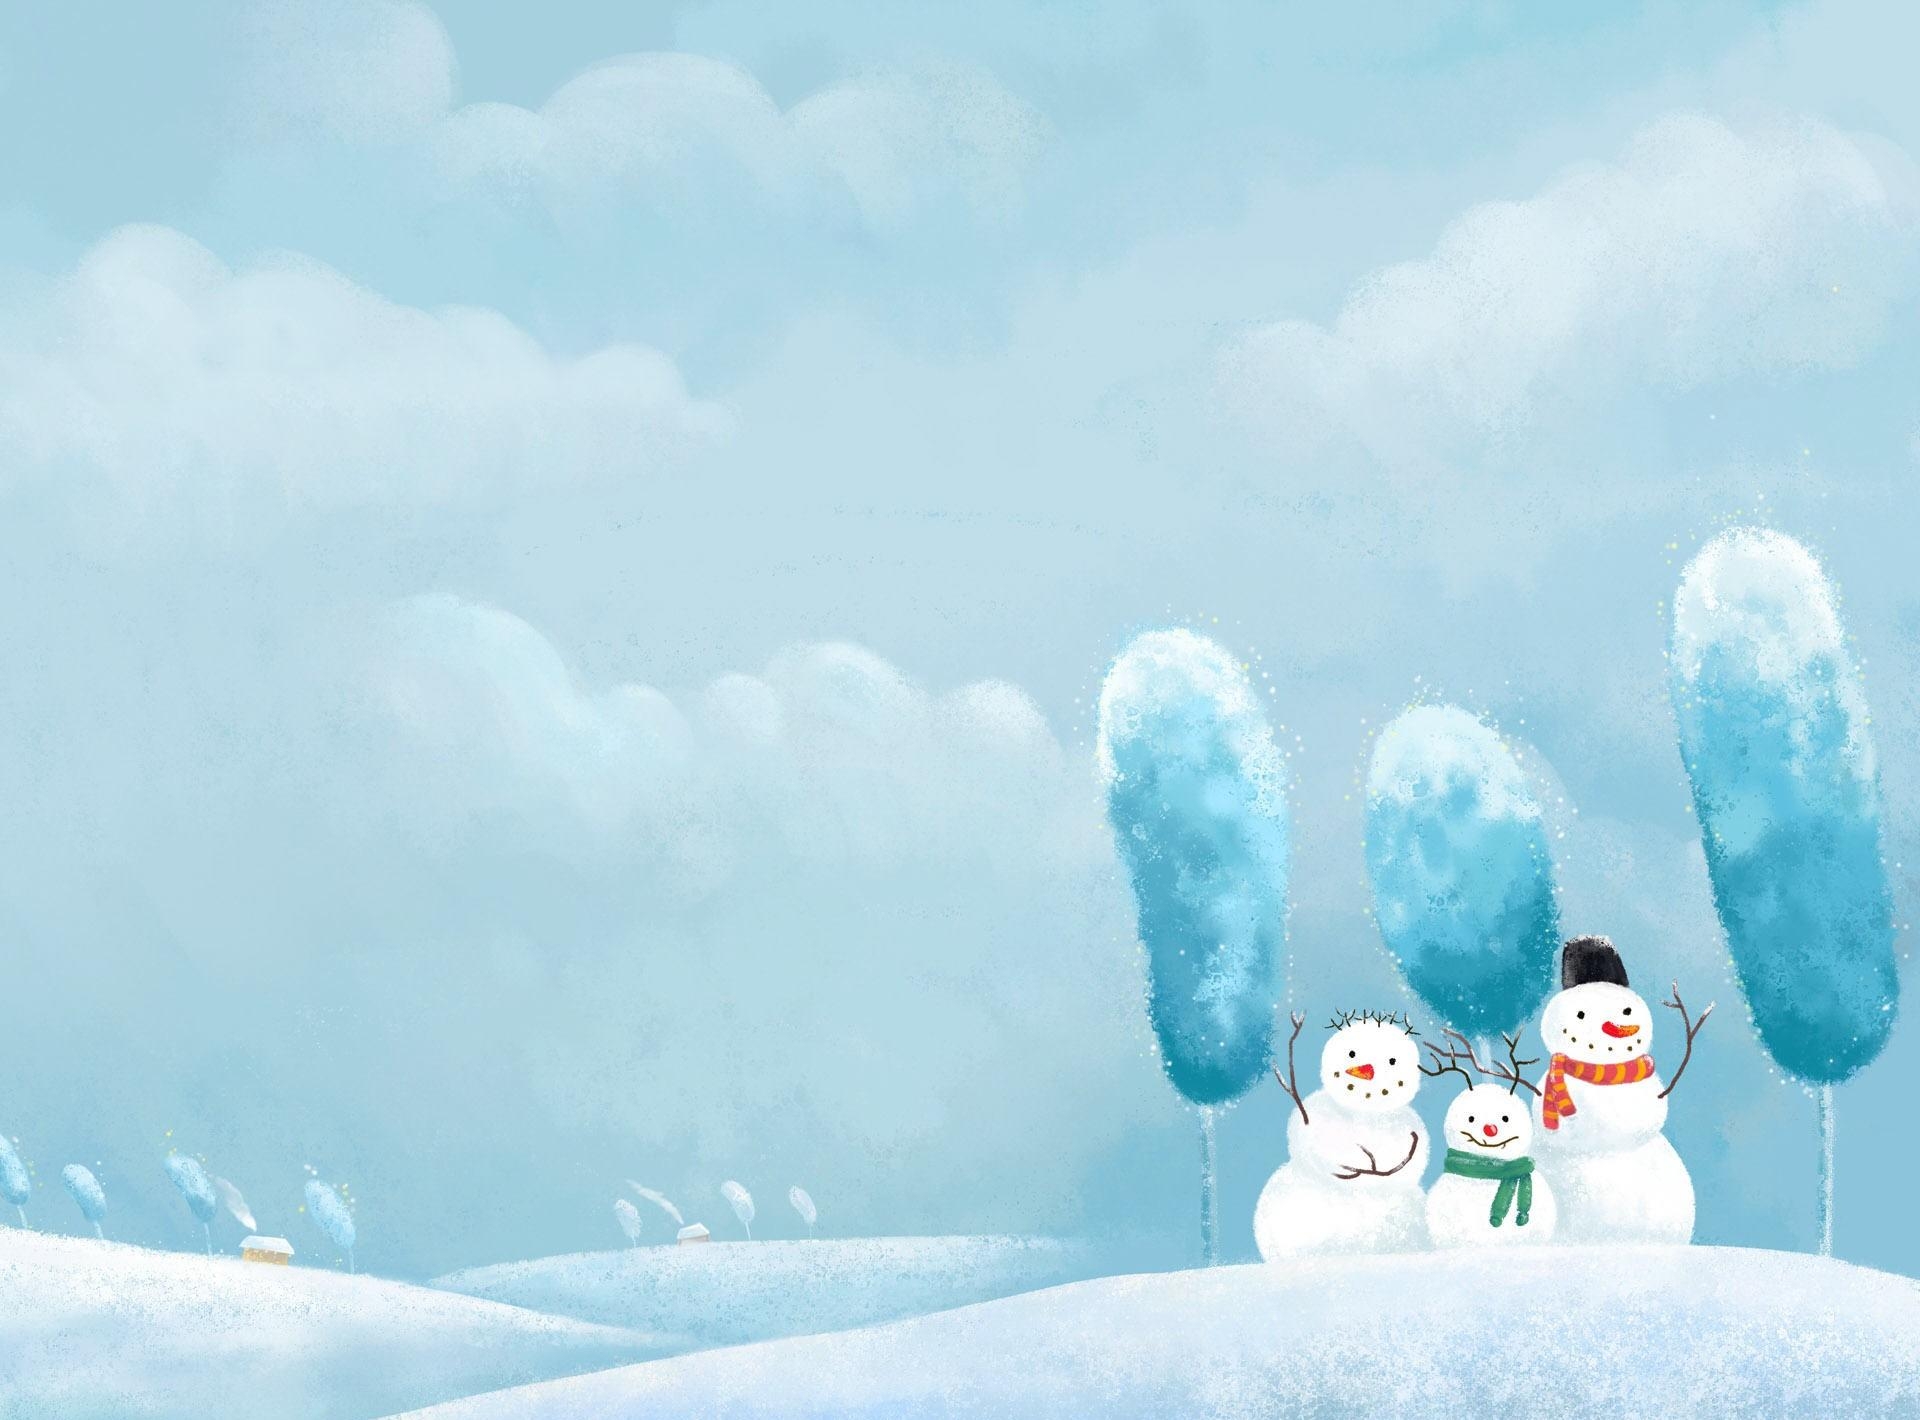 smiles, smile, holidays, winter, snowman, snowstorm, three, friends, winter storm Full HD